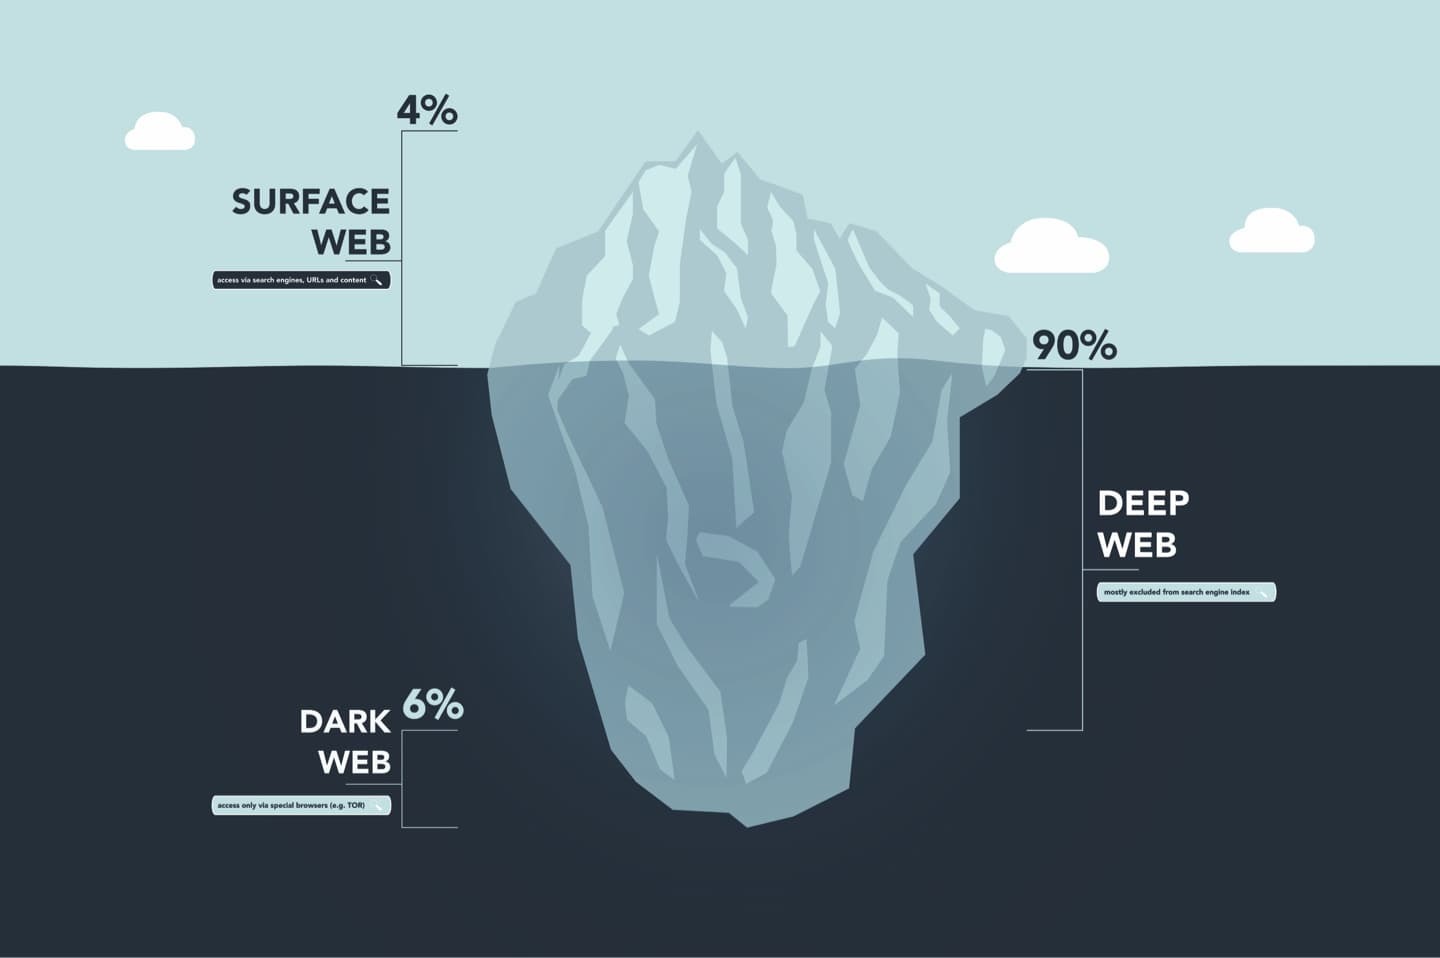 Image of an Iceberg showing the difference between the Deep and Dark Web.jpg